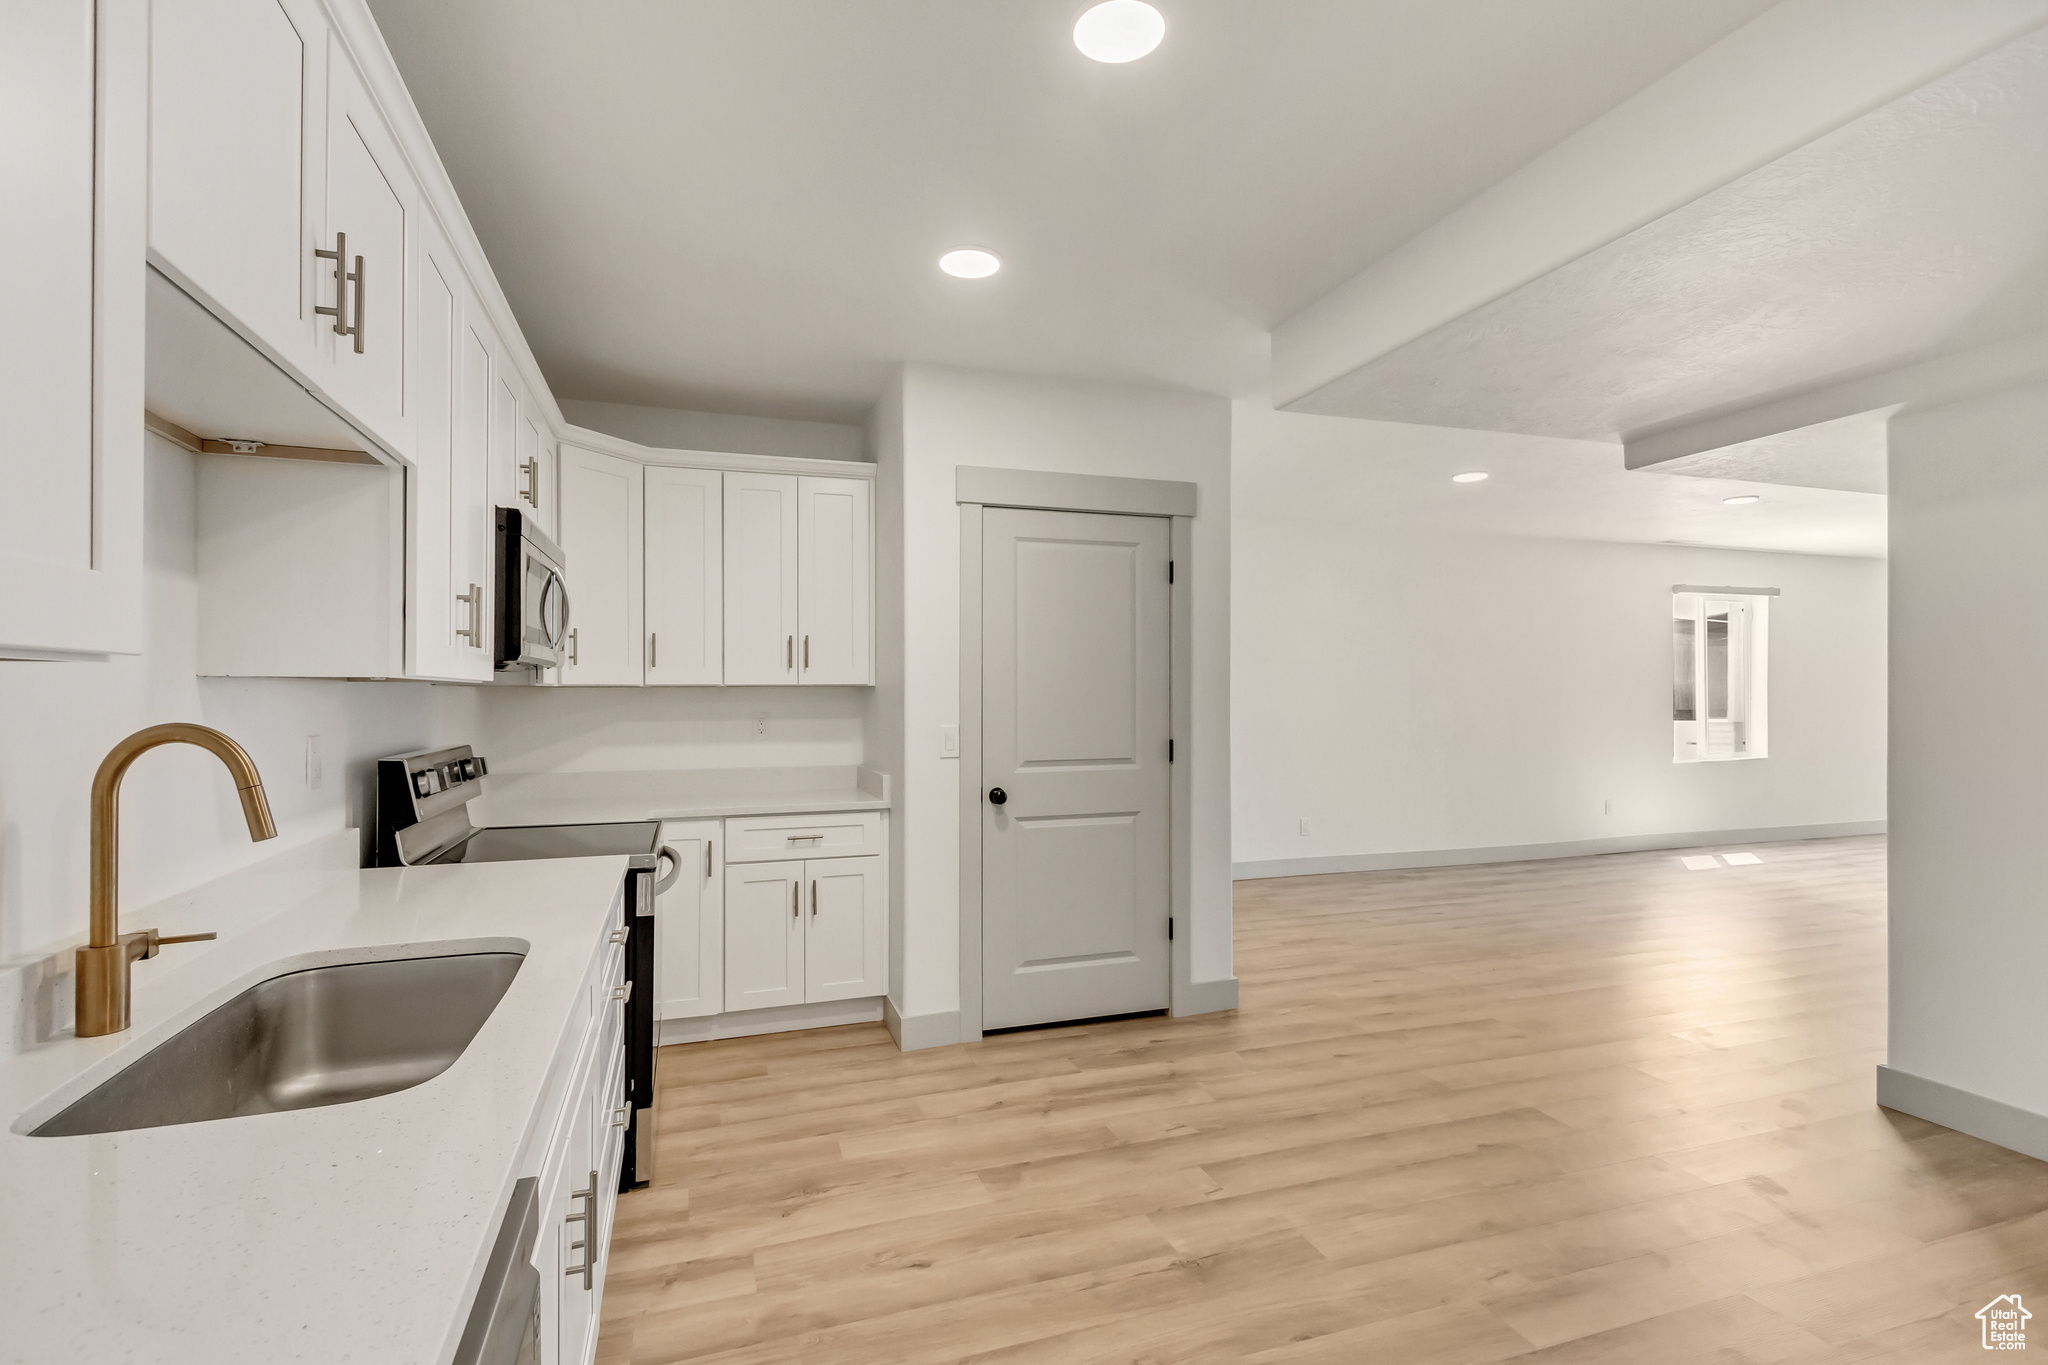 Kitchen with sink, light hardwood / wood-style flooring, white cabinetry, and appliances with stainless steel finishes